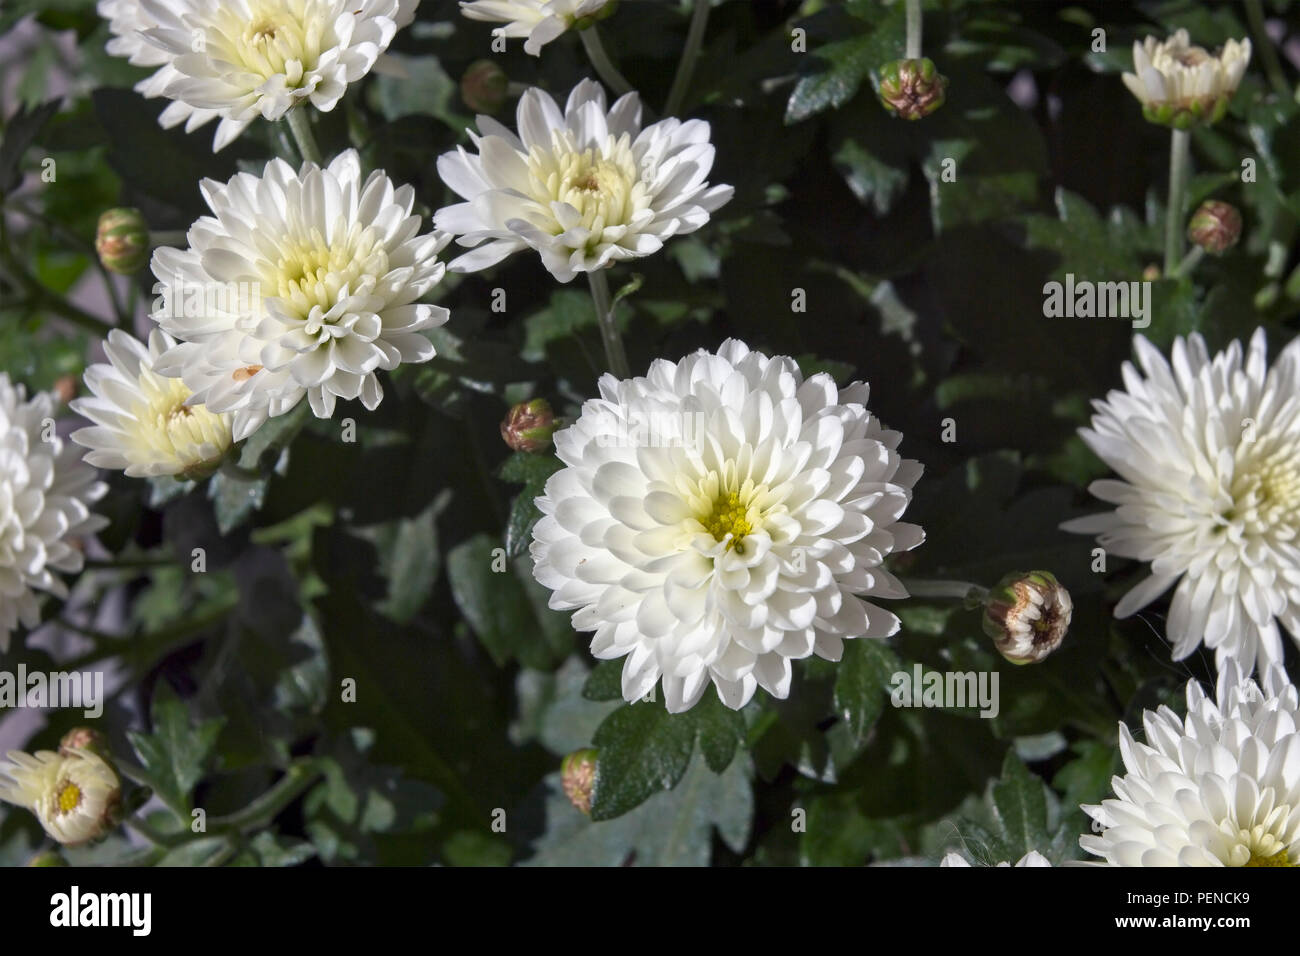 White Chrysanthemum High Resolution Stock Photography And Images Alamy